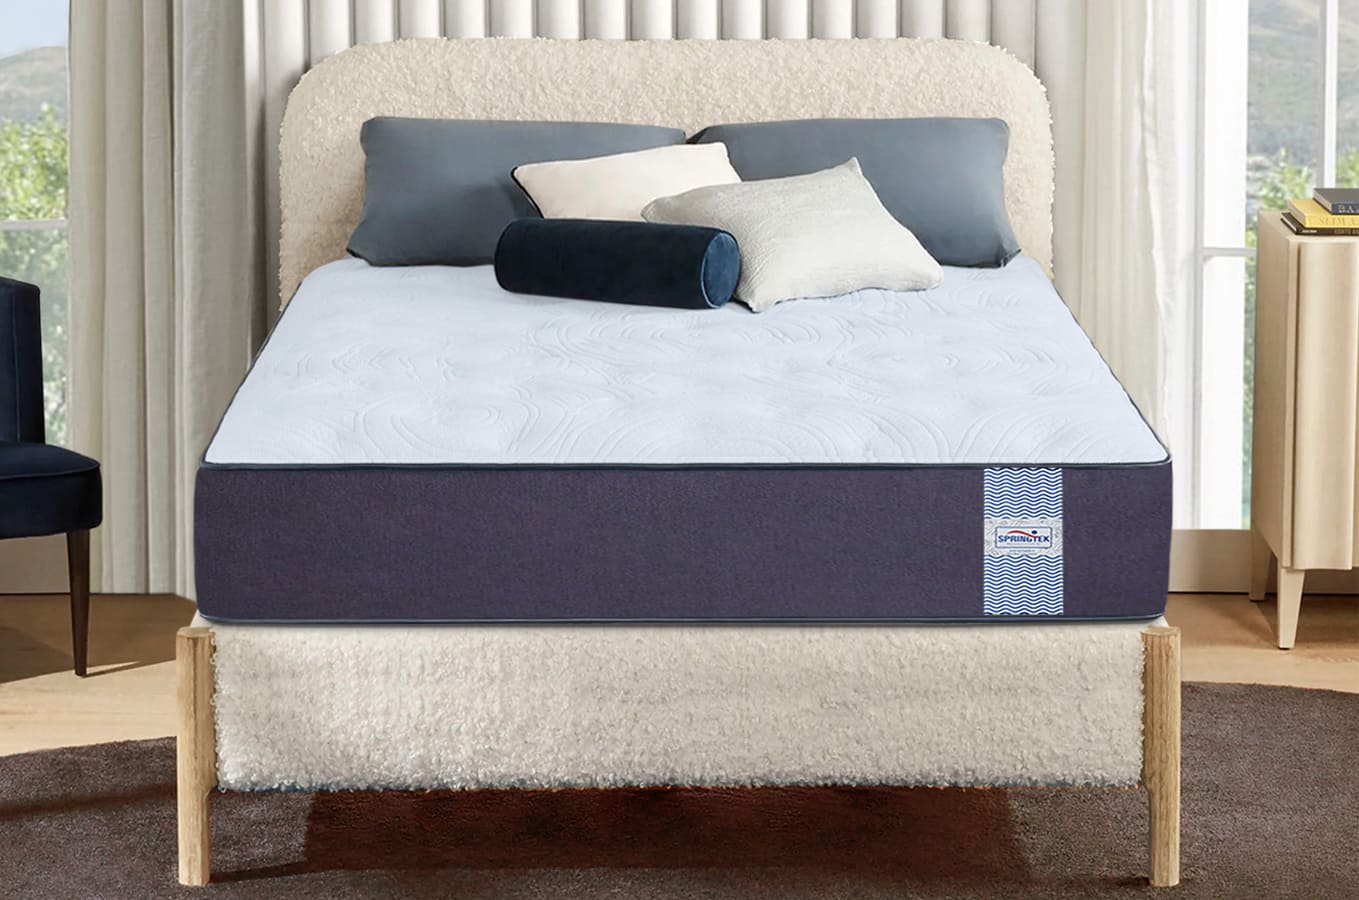 The reversible mattress for the ultimate sleep adventure! Firmness